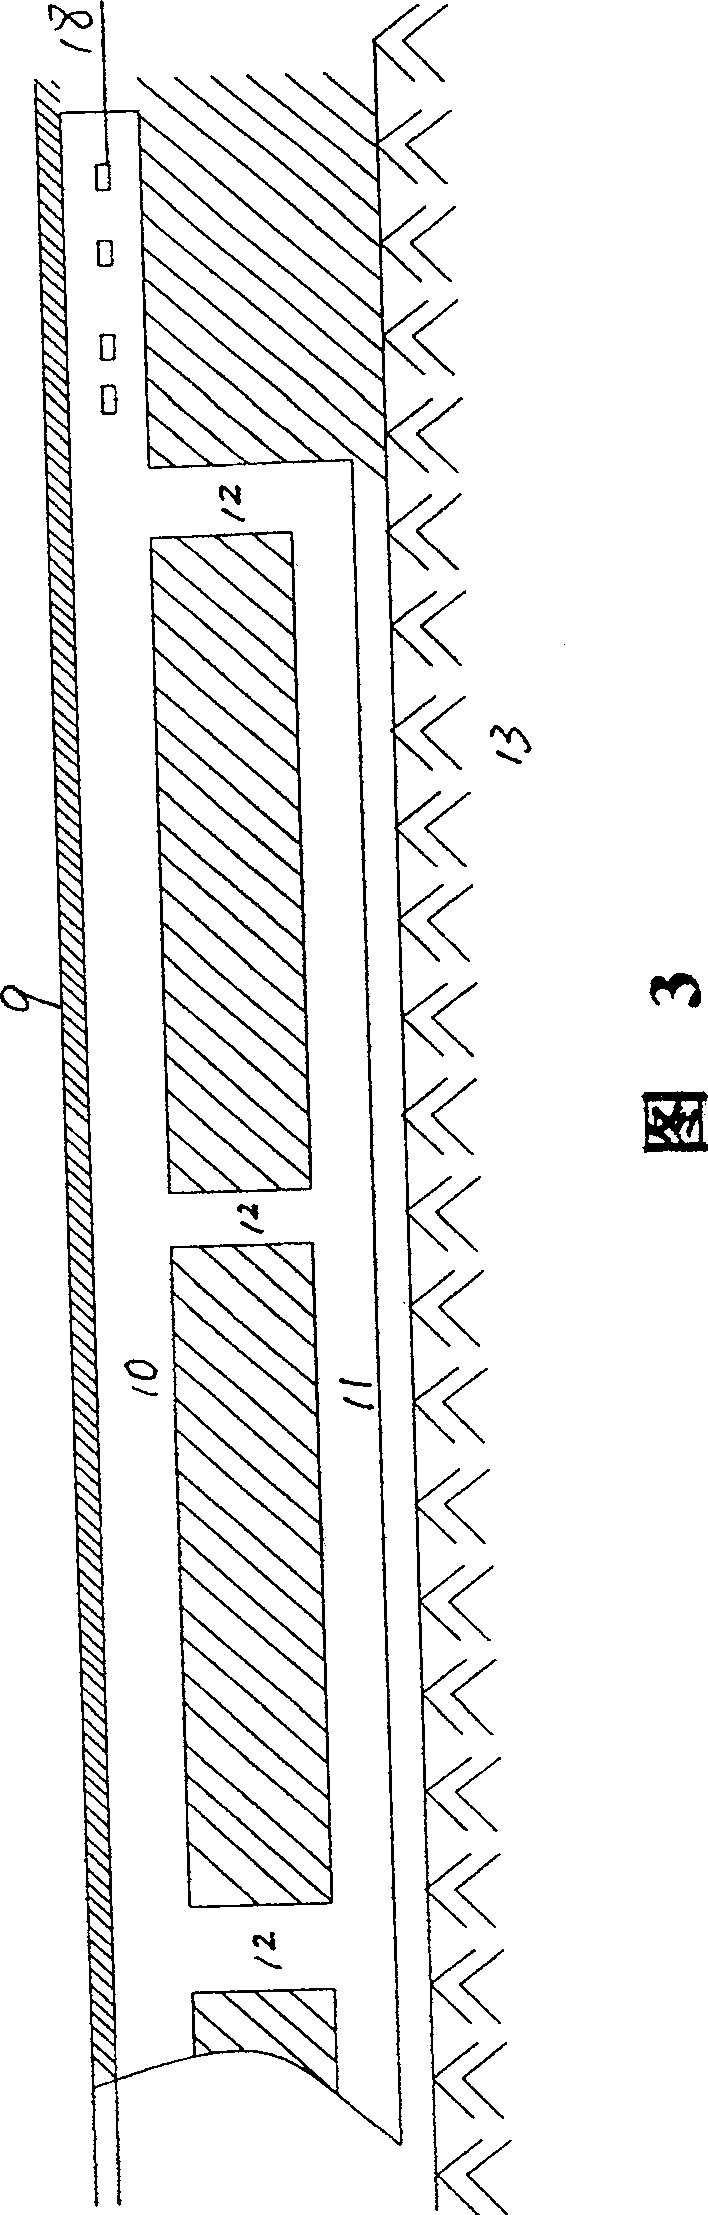 Coal-mining method of high-dipping thick seam